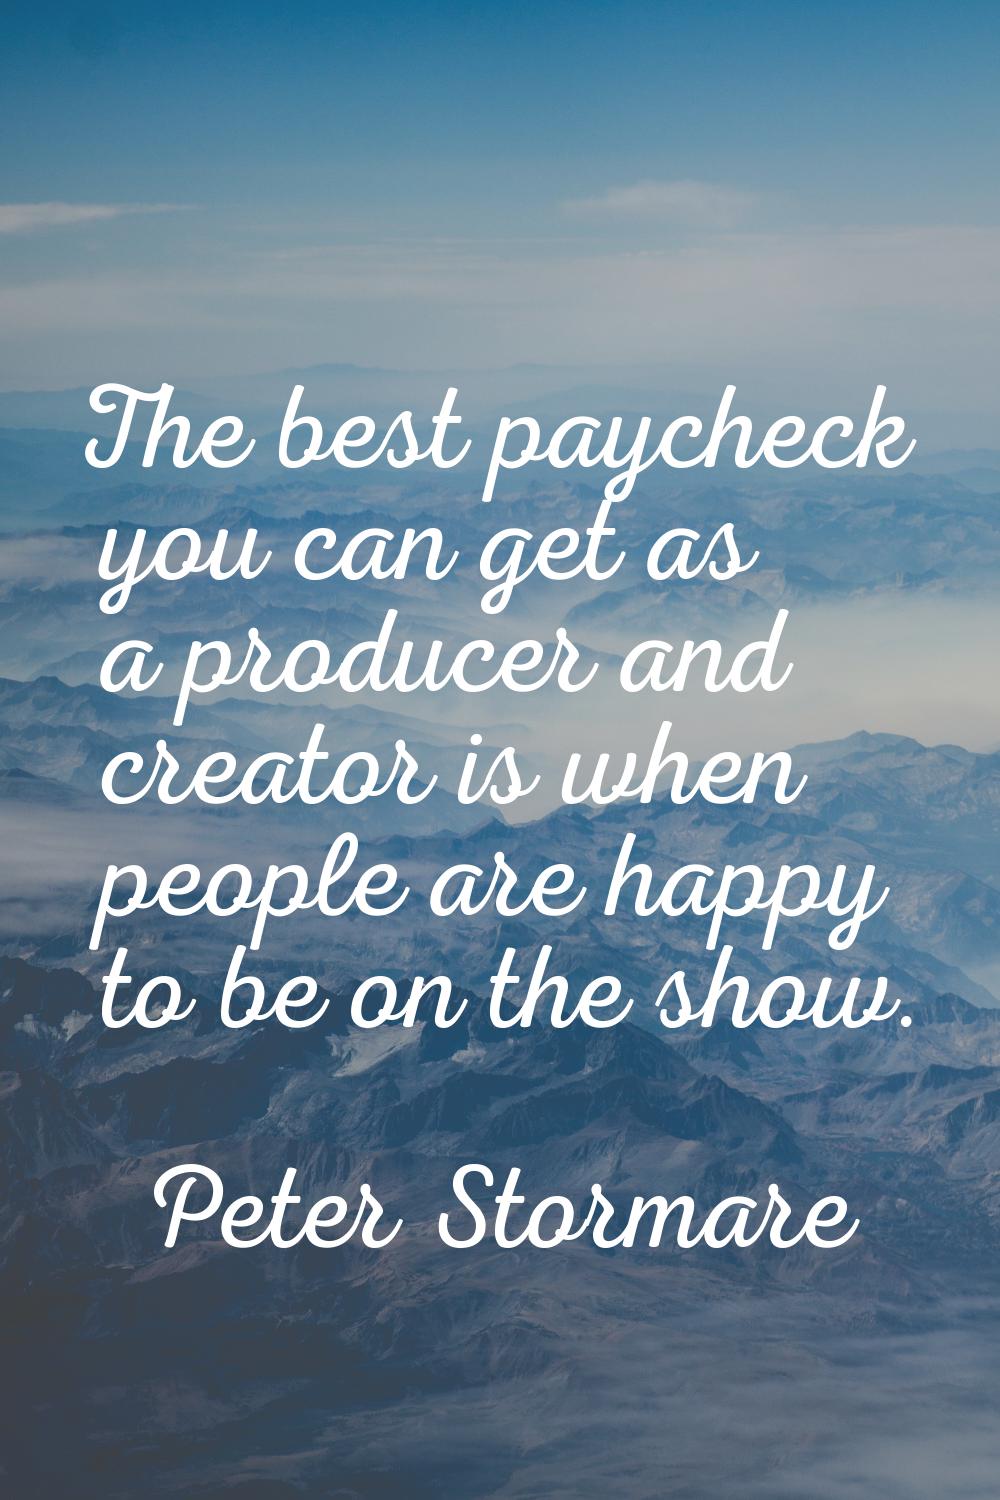 The best paycheck you can get as a producer and creator is when people are happy to be on the show.